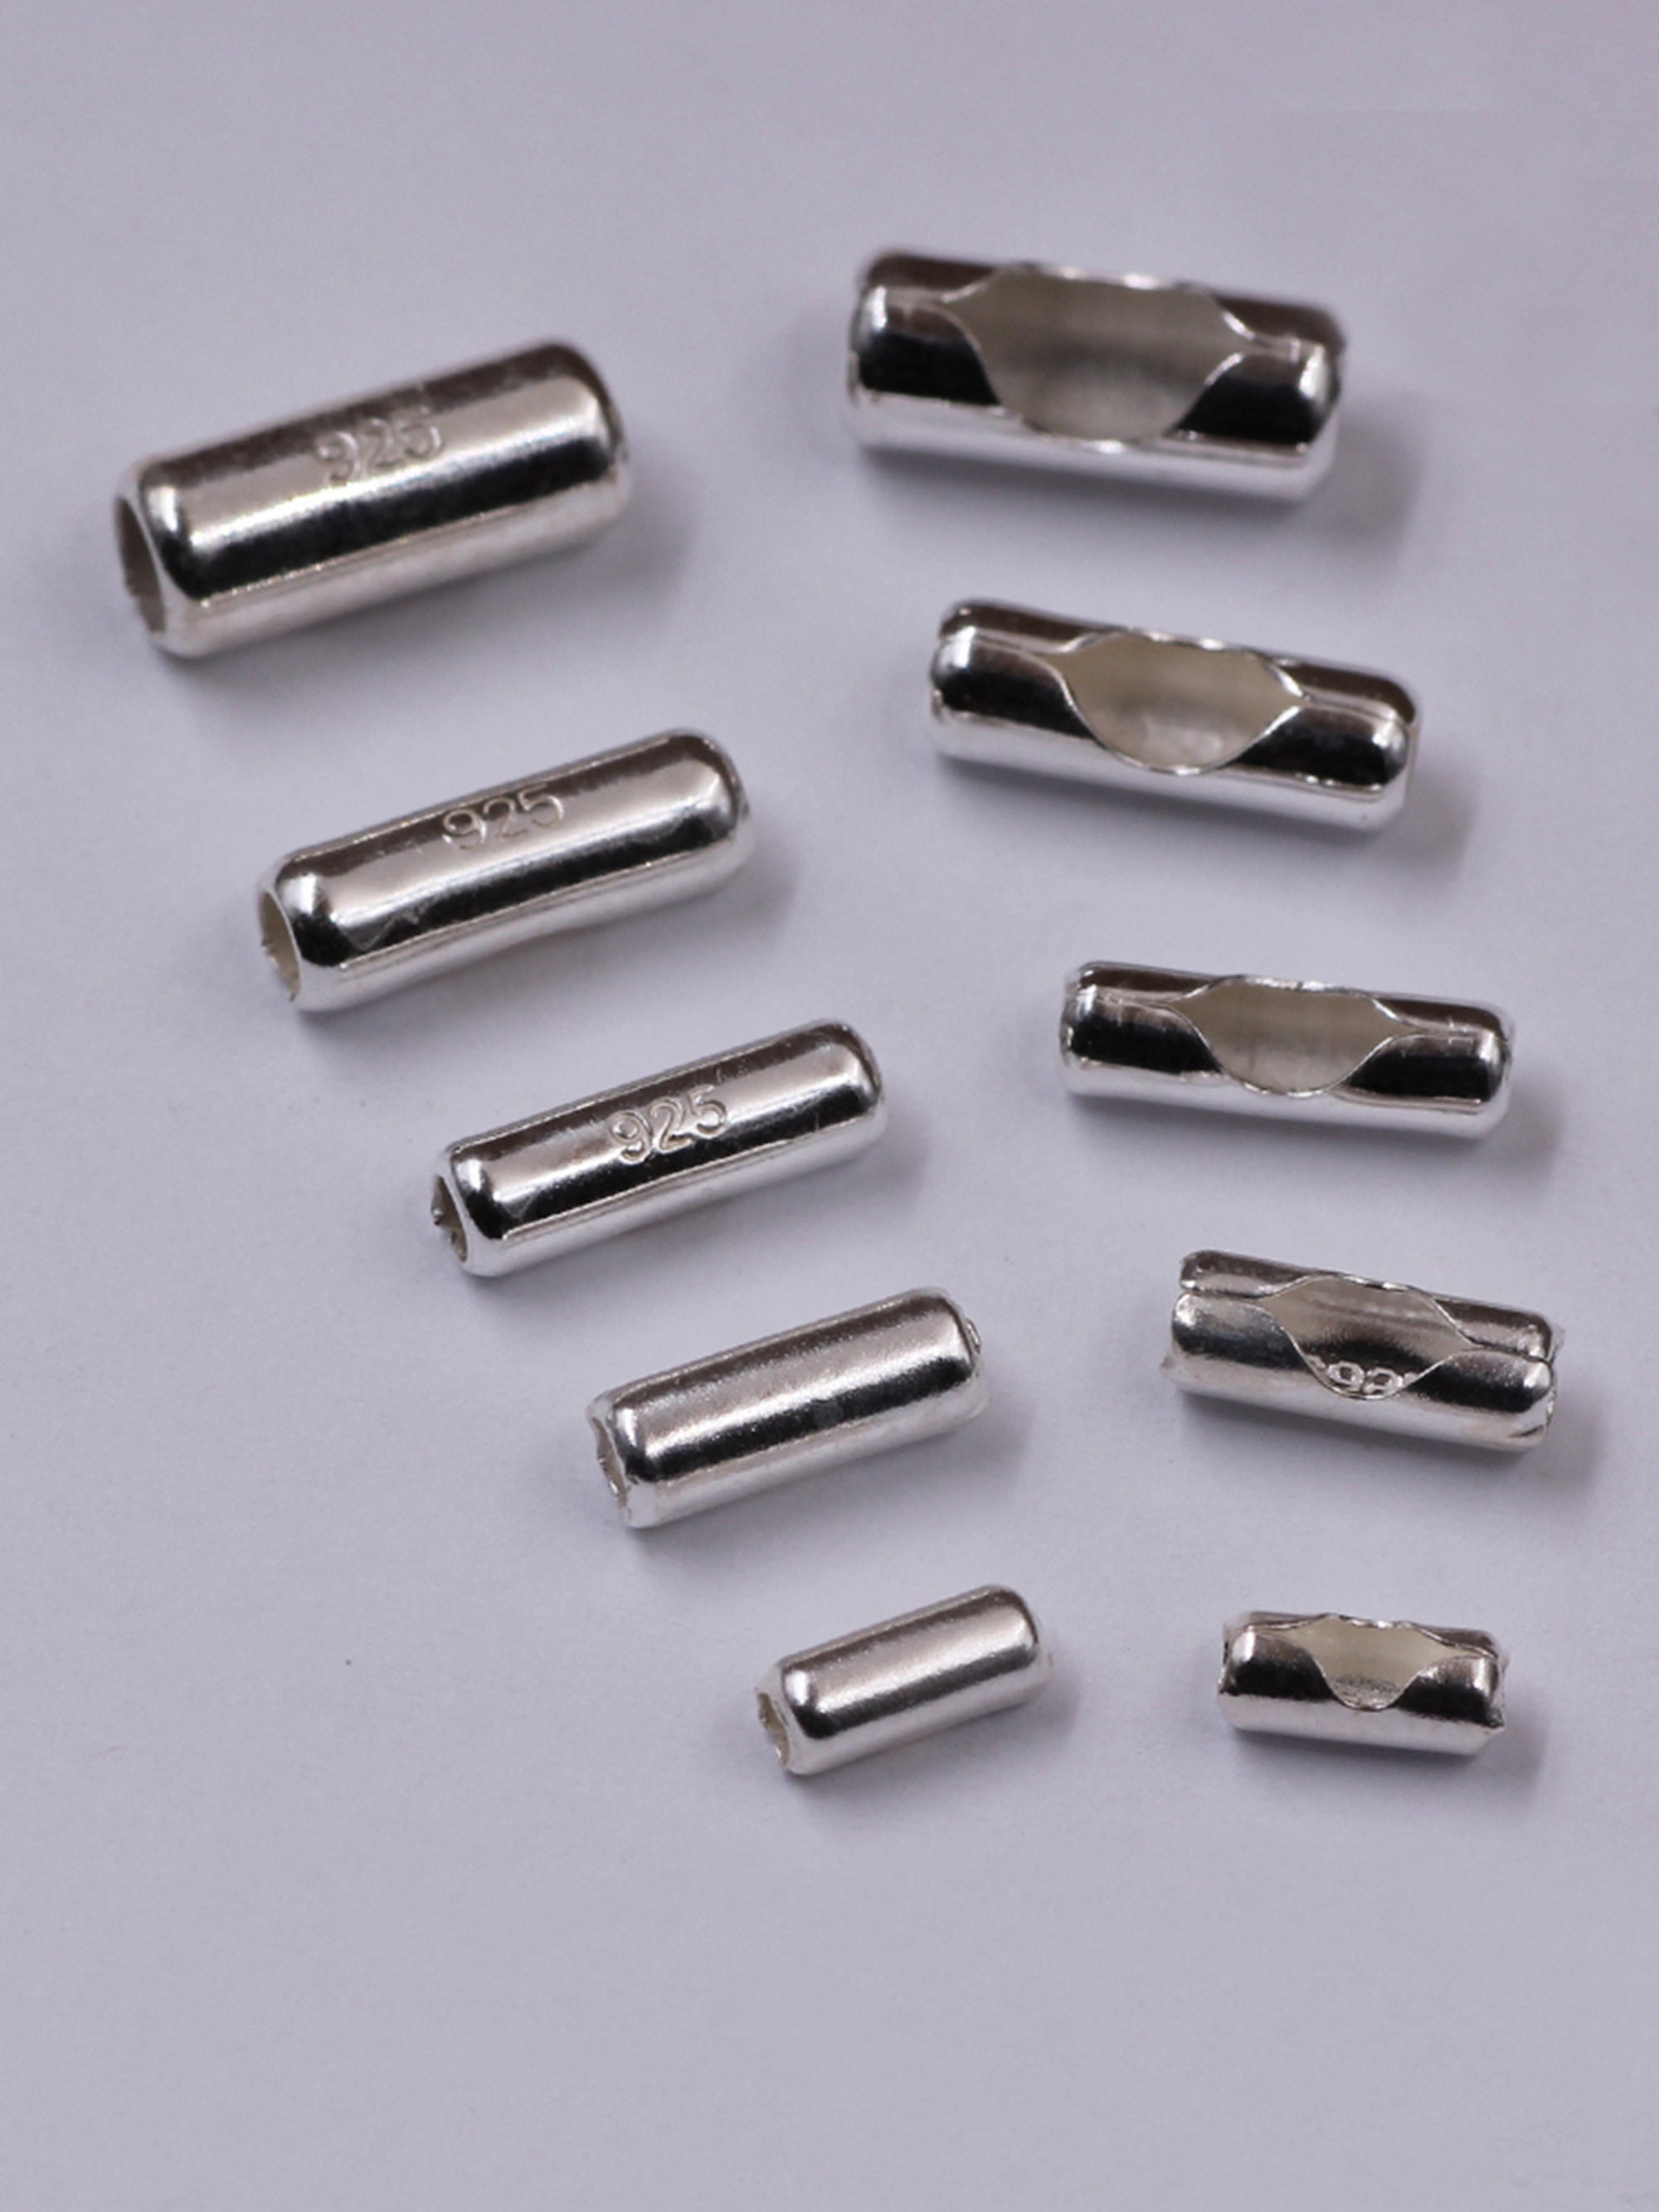 50 Stainless Steel Ball Chain Connectors 2.4mm F401 